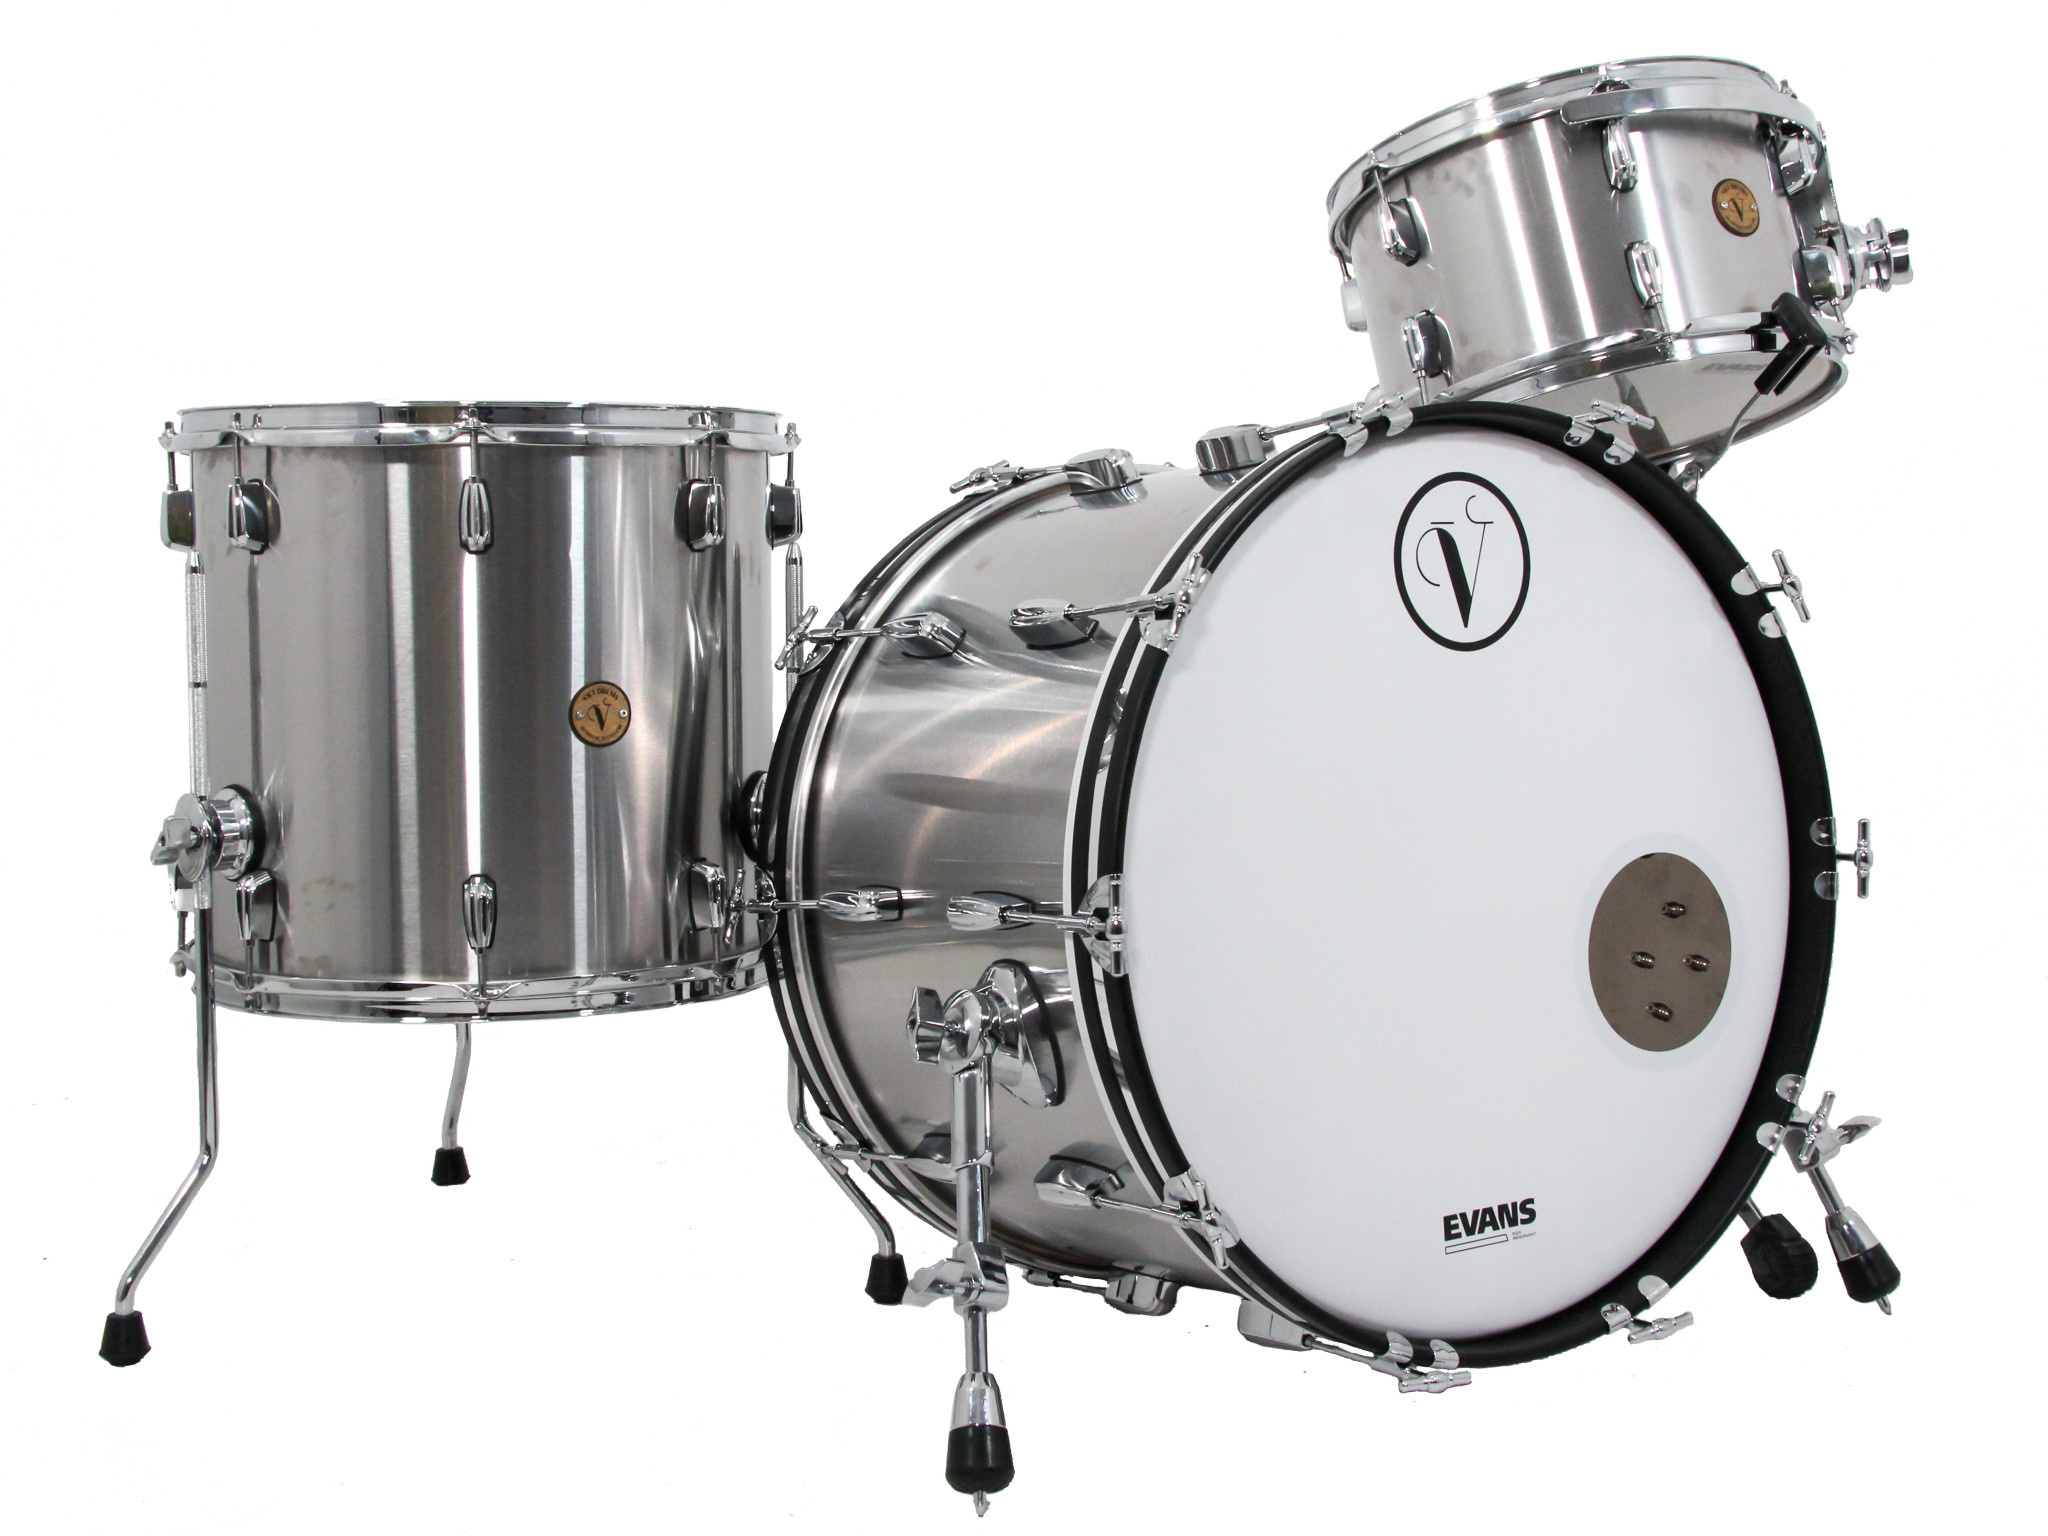 Vici Stainless Steel 22 Drum Kit  Graham Russell Drums - Graham Russell  Drums